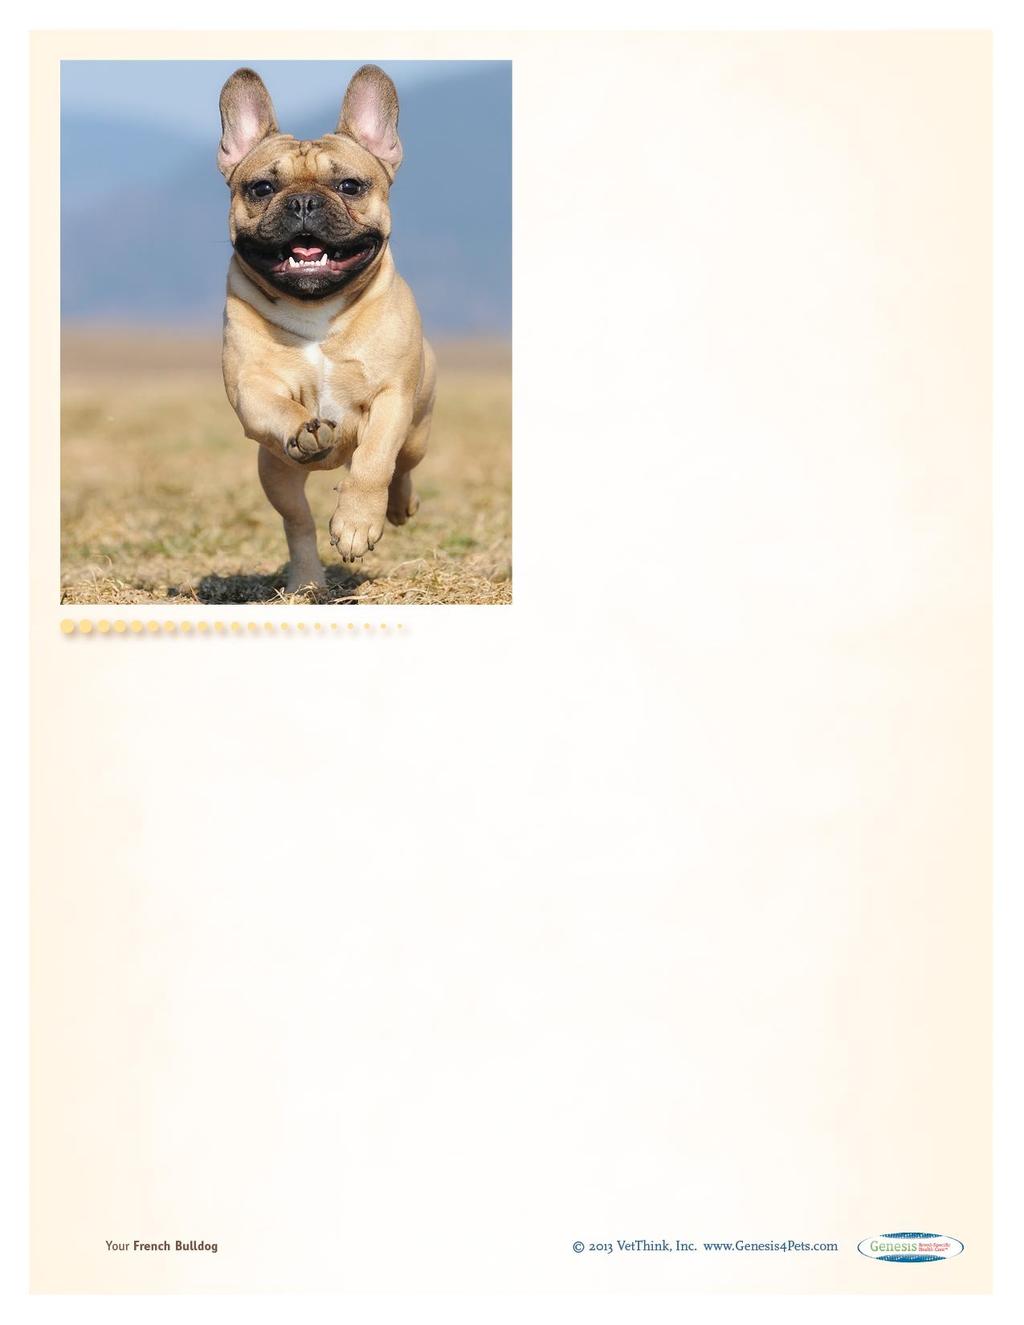 This guide contains general health information important to all canines as well as the most important genetic predispositions for French Bulldogs.